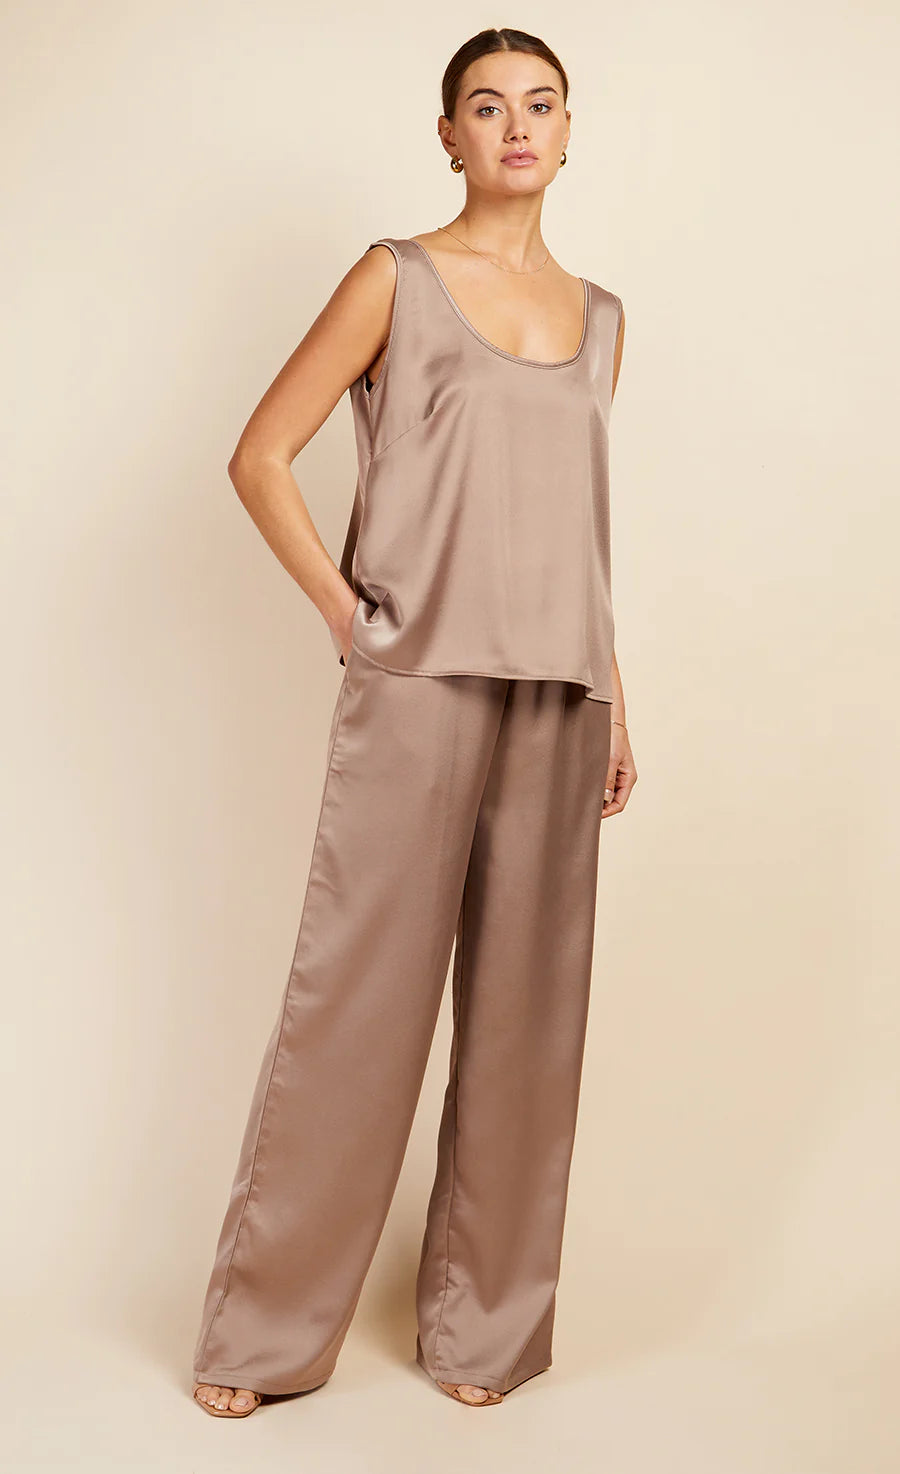 Stone Satin Trousers (Natural)